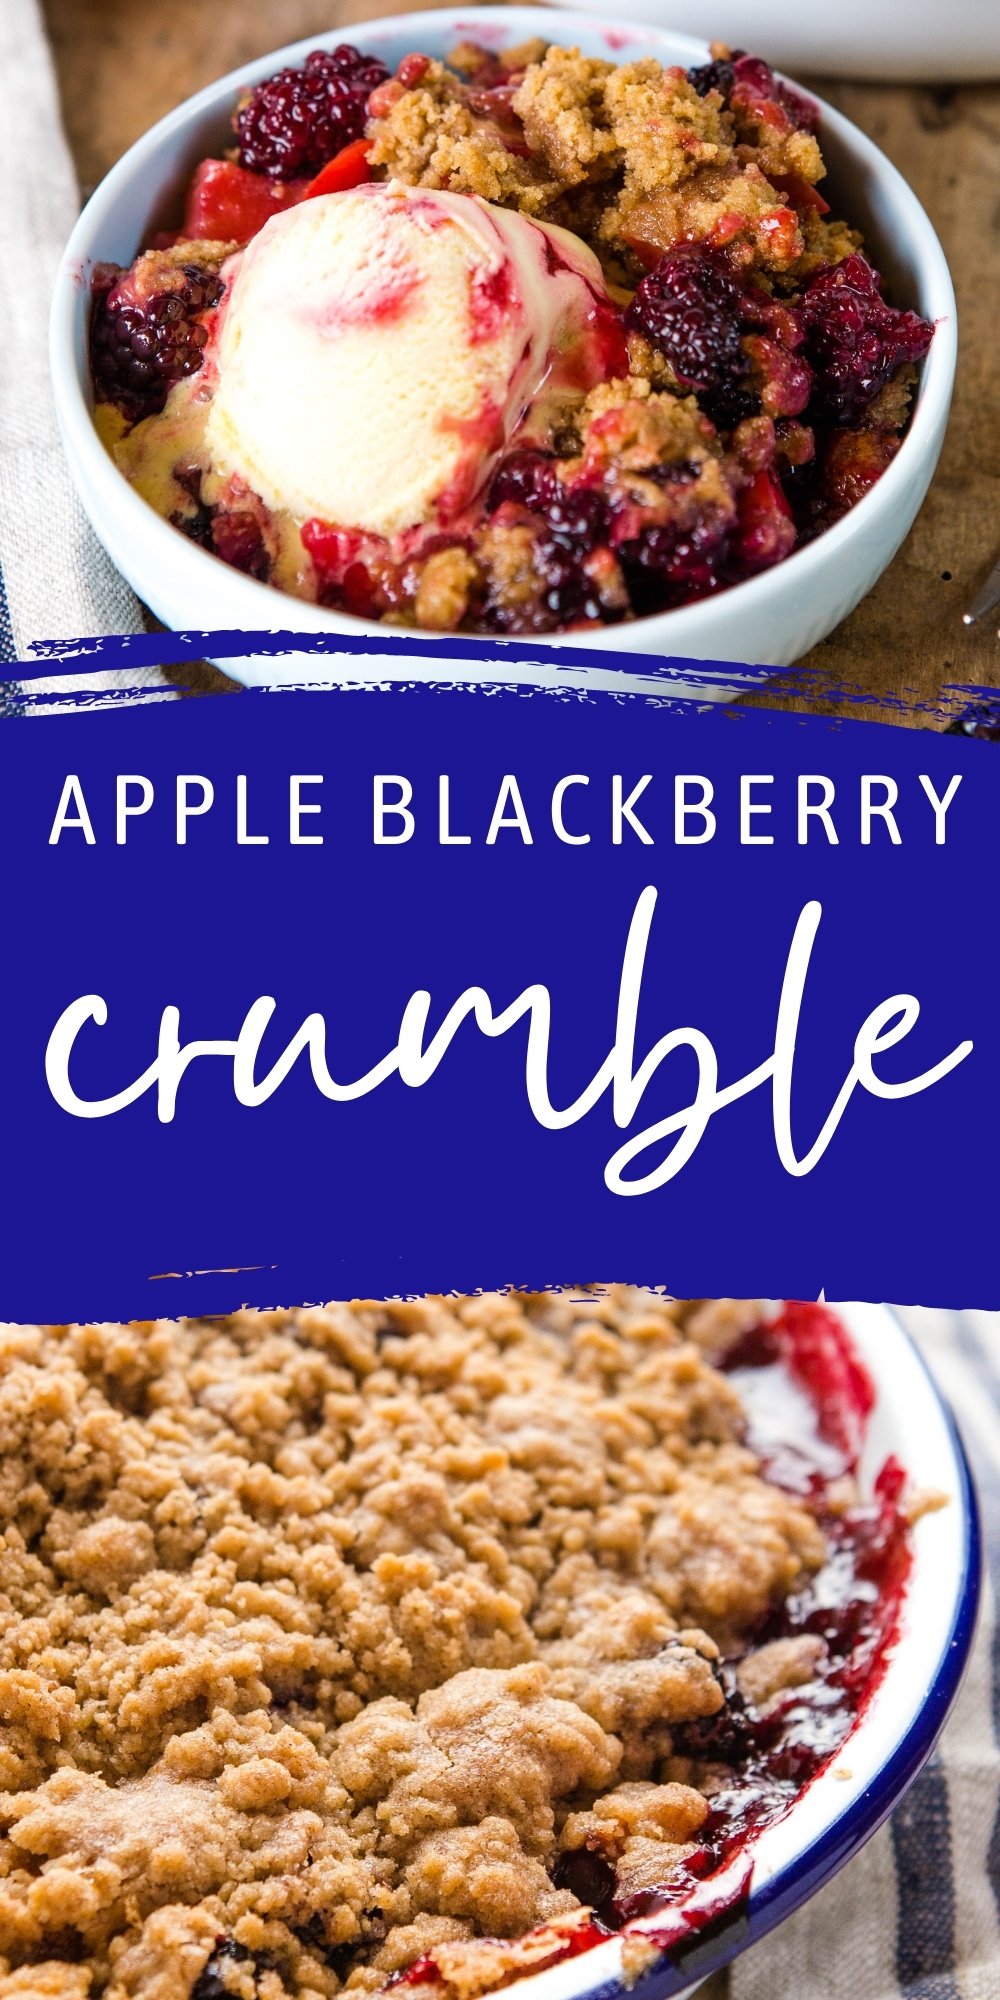 This Apple and Blackberry Crumble is the perfect easy summer dessert baked to perfection with fresh apples and blackberries, topped with a sweet crumble topping! Recipe from thebusybaker.ca! #appleandblackberrycrumble #summerdessert #appleblackberry #fruitcrumble #topping #harvest via @busybakerblog